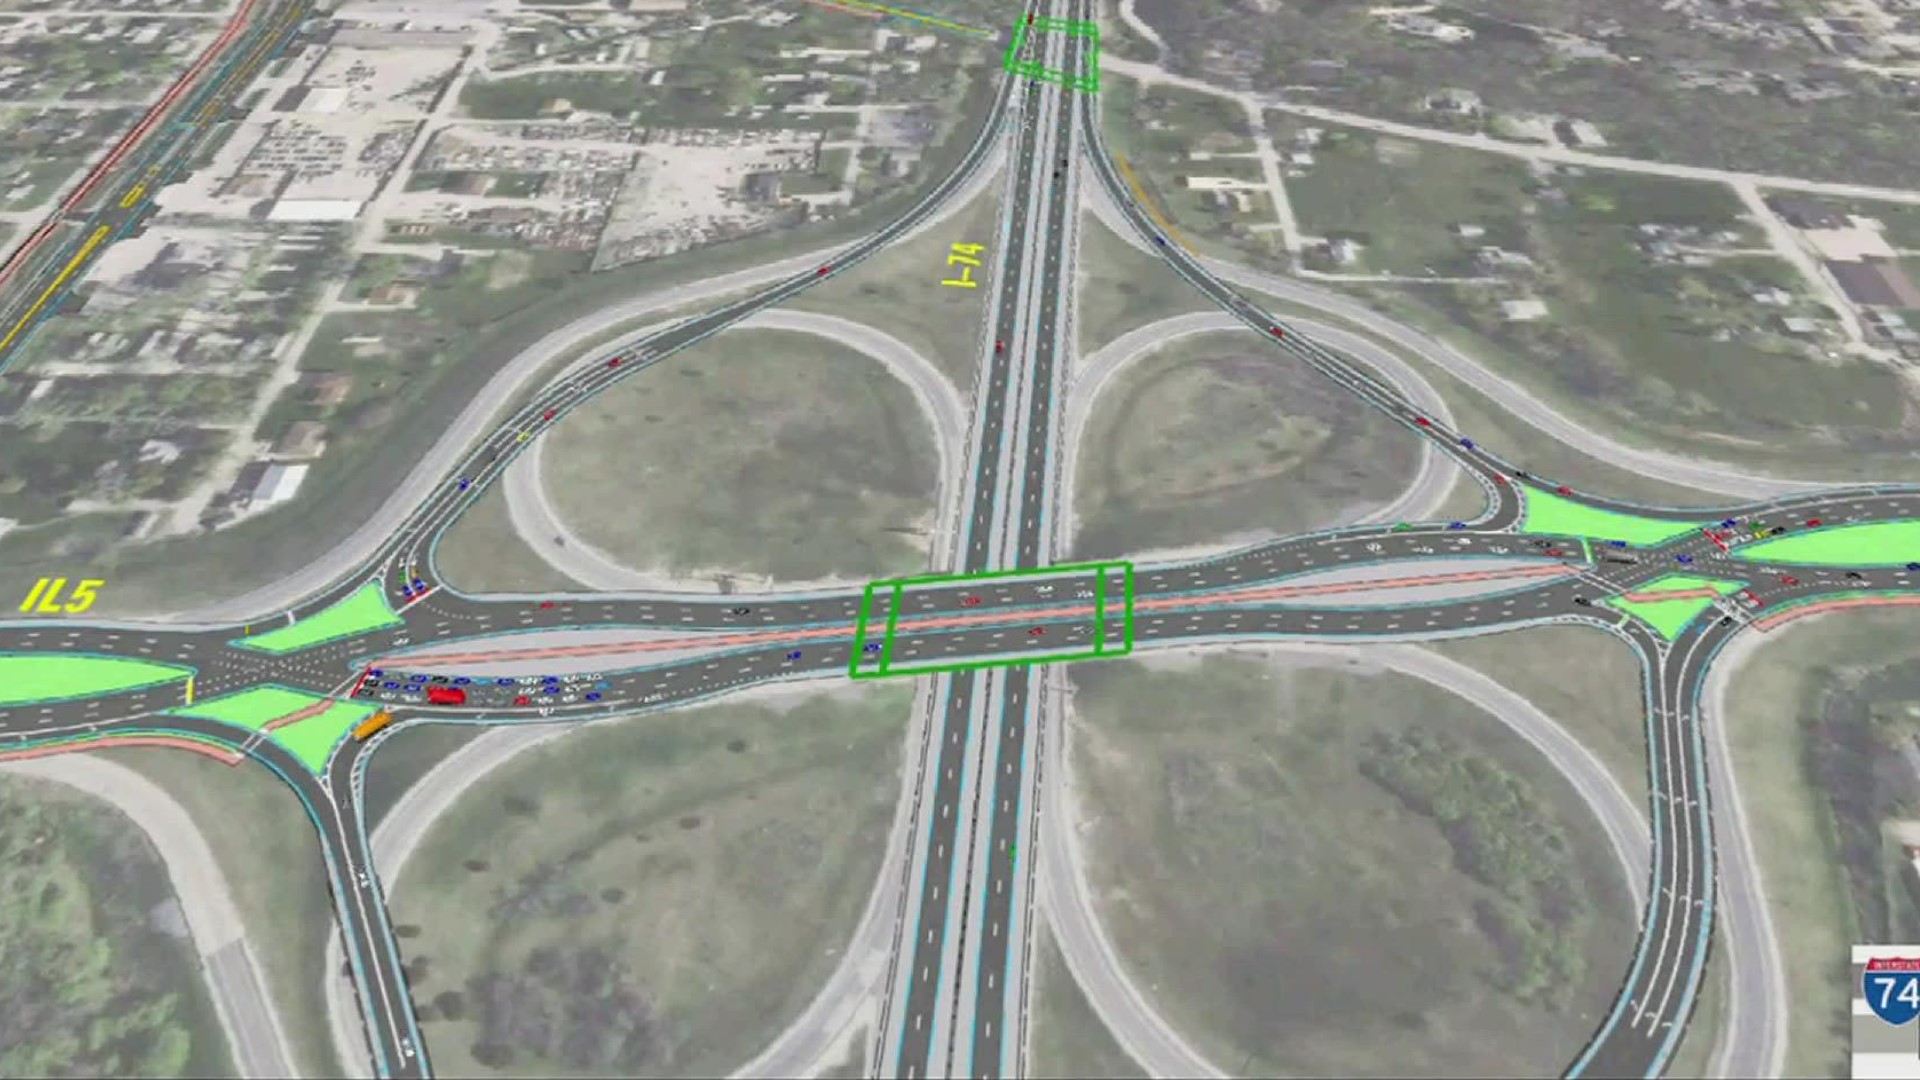 The new interchange would remove the clover ramps and replace it with a diverging diamond interchange, which has you temporarily drive on the left side of the road.